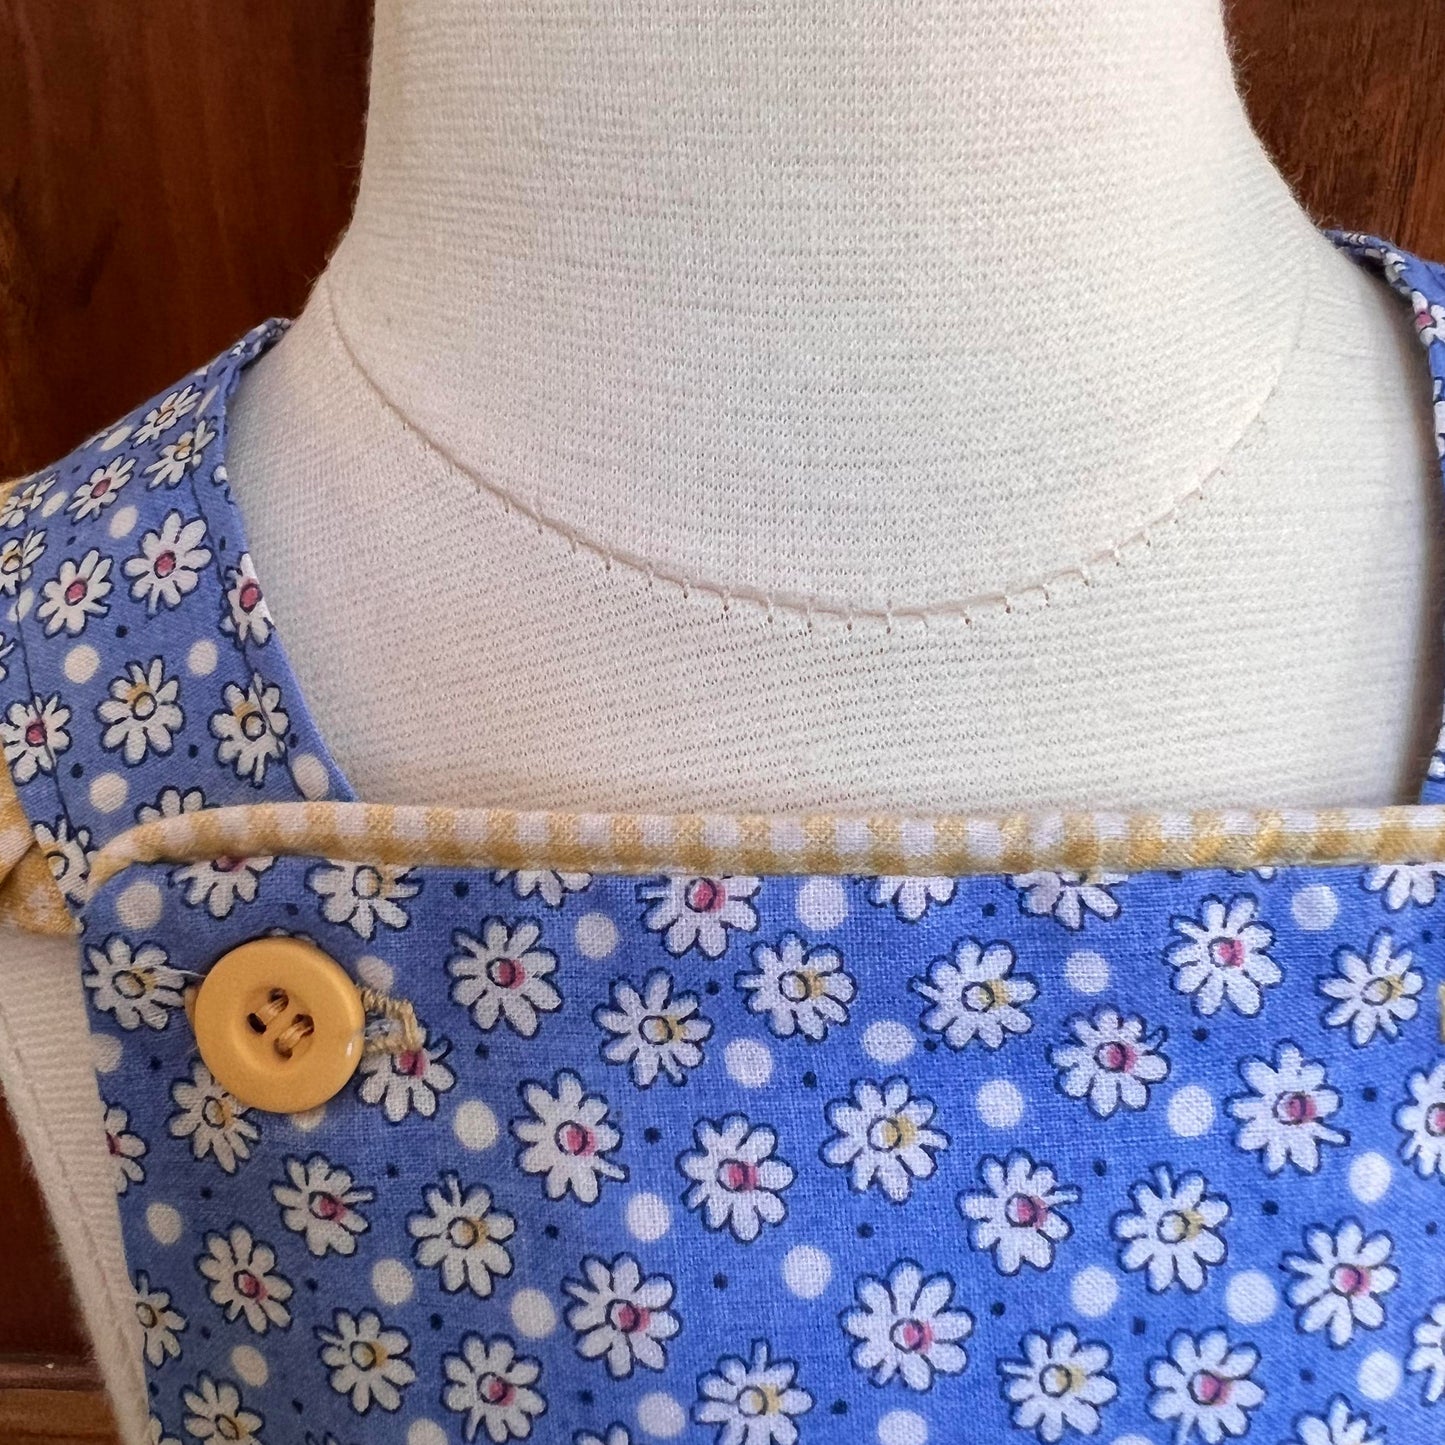 Darling size 2T blue daisy romper with flower button waistband yellow and blue. Ruffled straps. Free Shipping